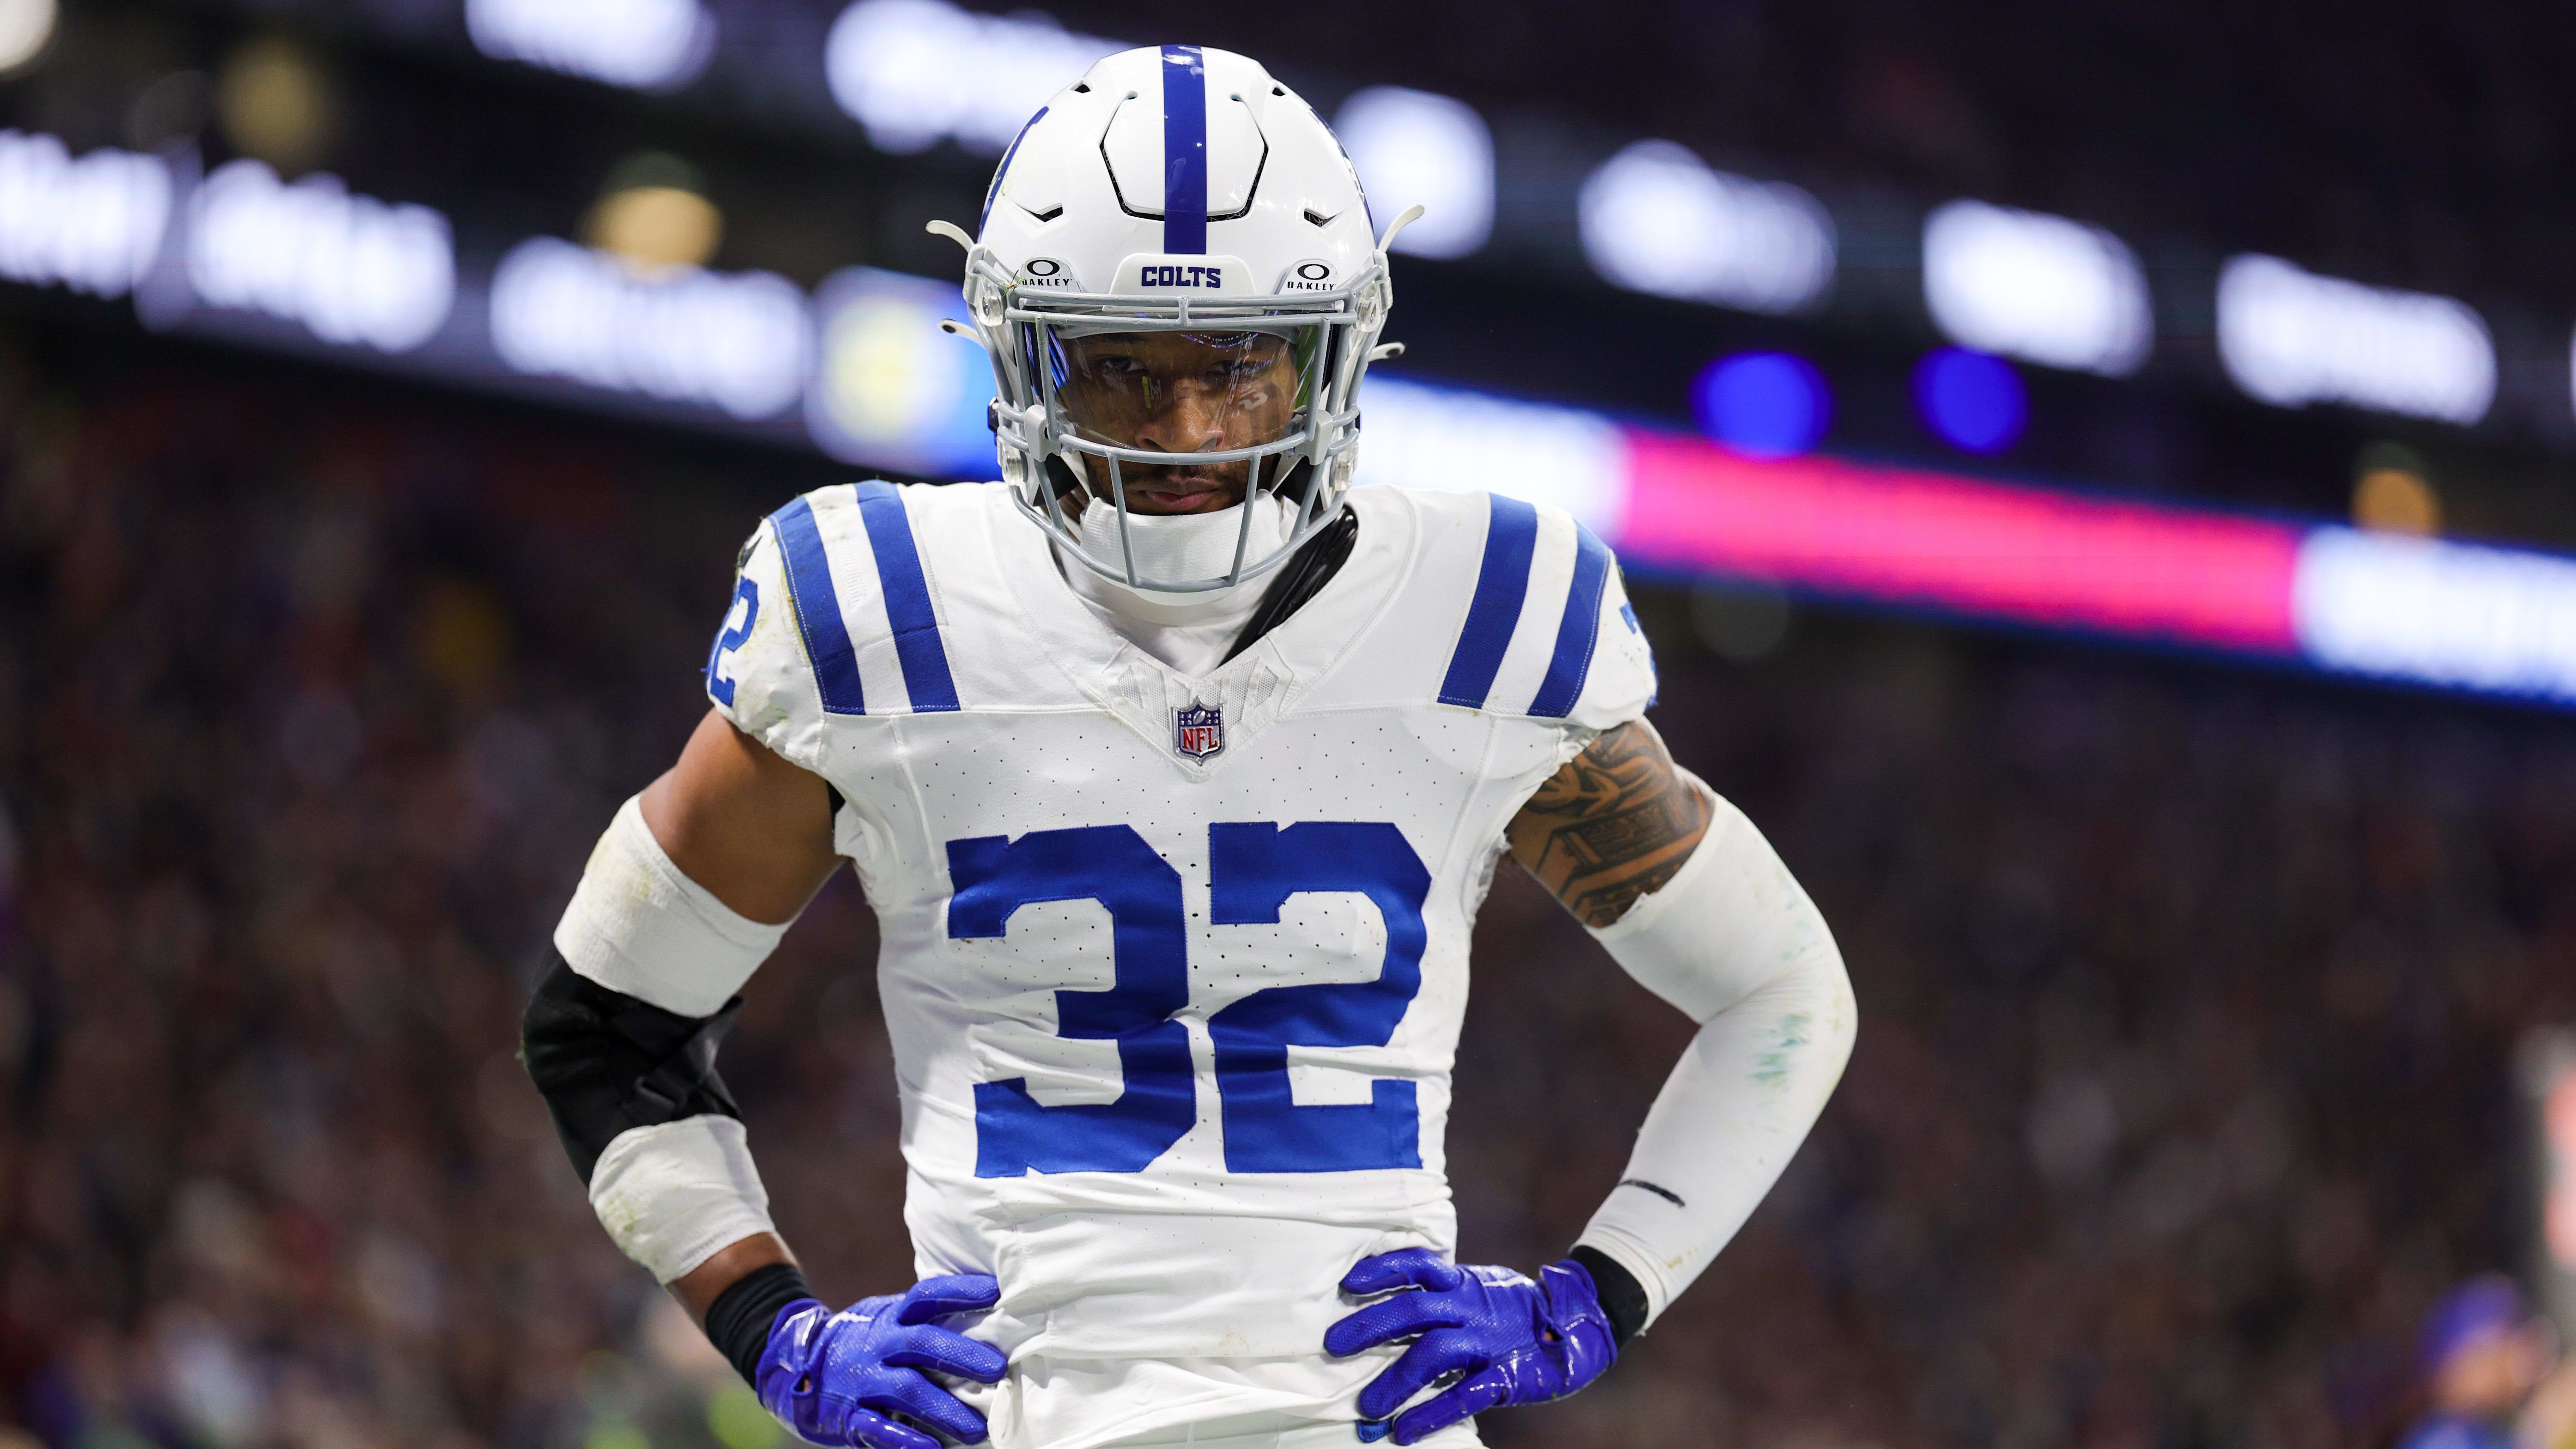 Colts Re-Sign Playmaking Safety to Bolster Secondary